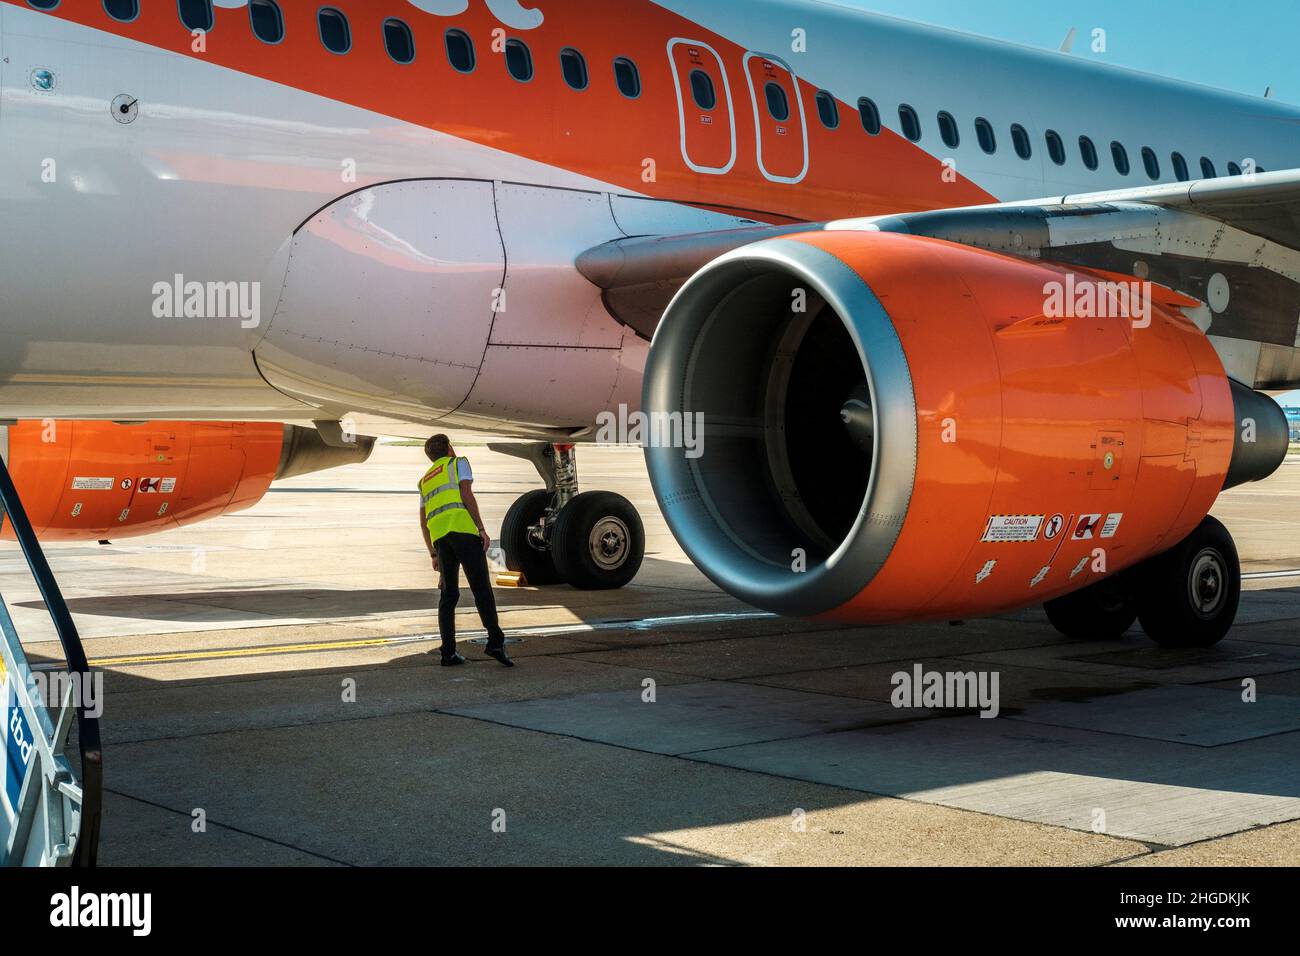 Aviation engineer inspects Easyjet airplane between scheduled lights, London Gatwick Airport, England Stock Photo